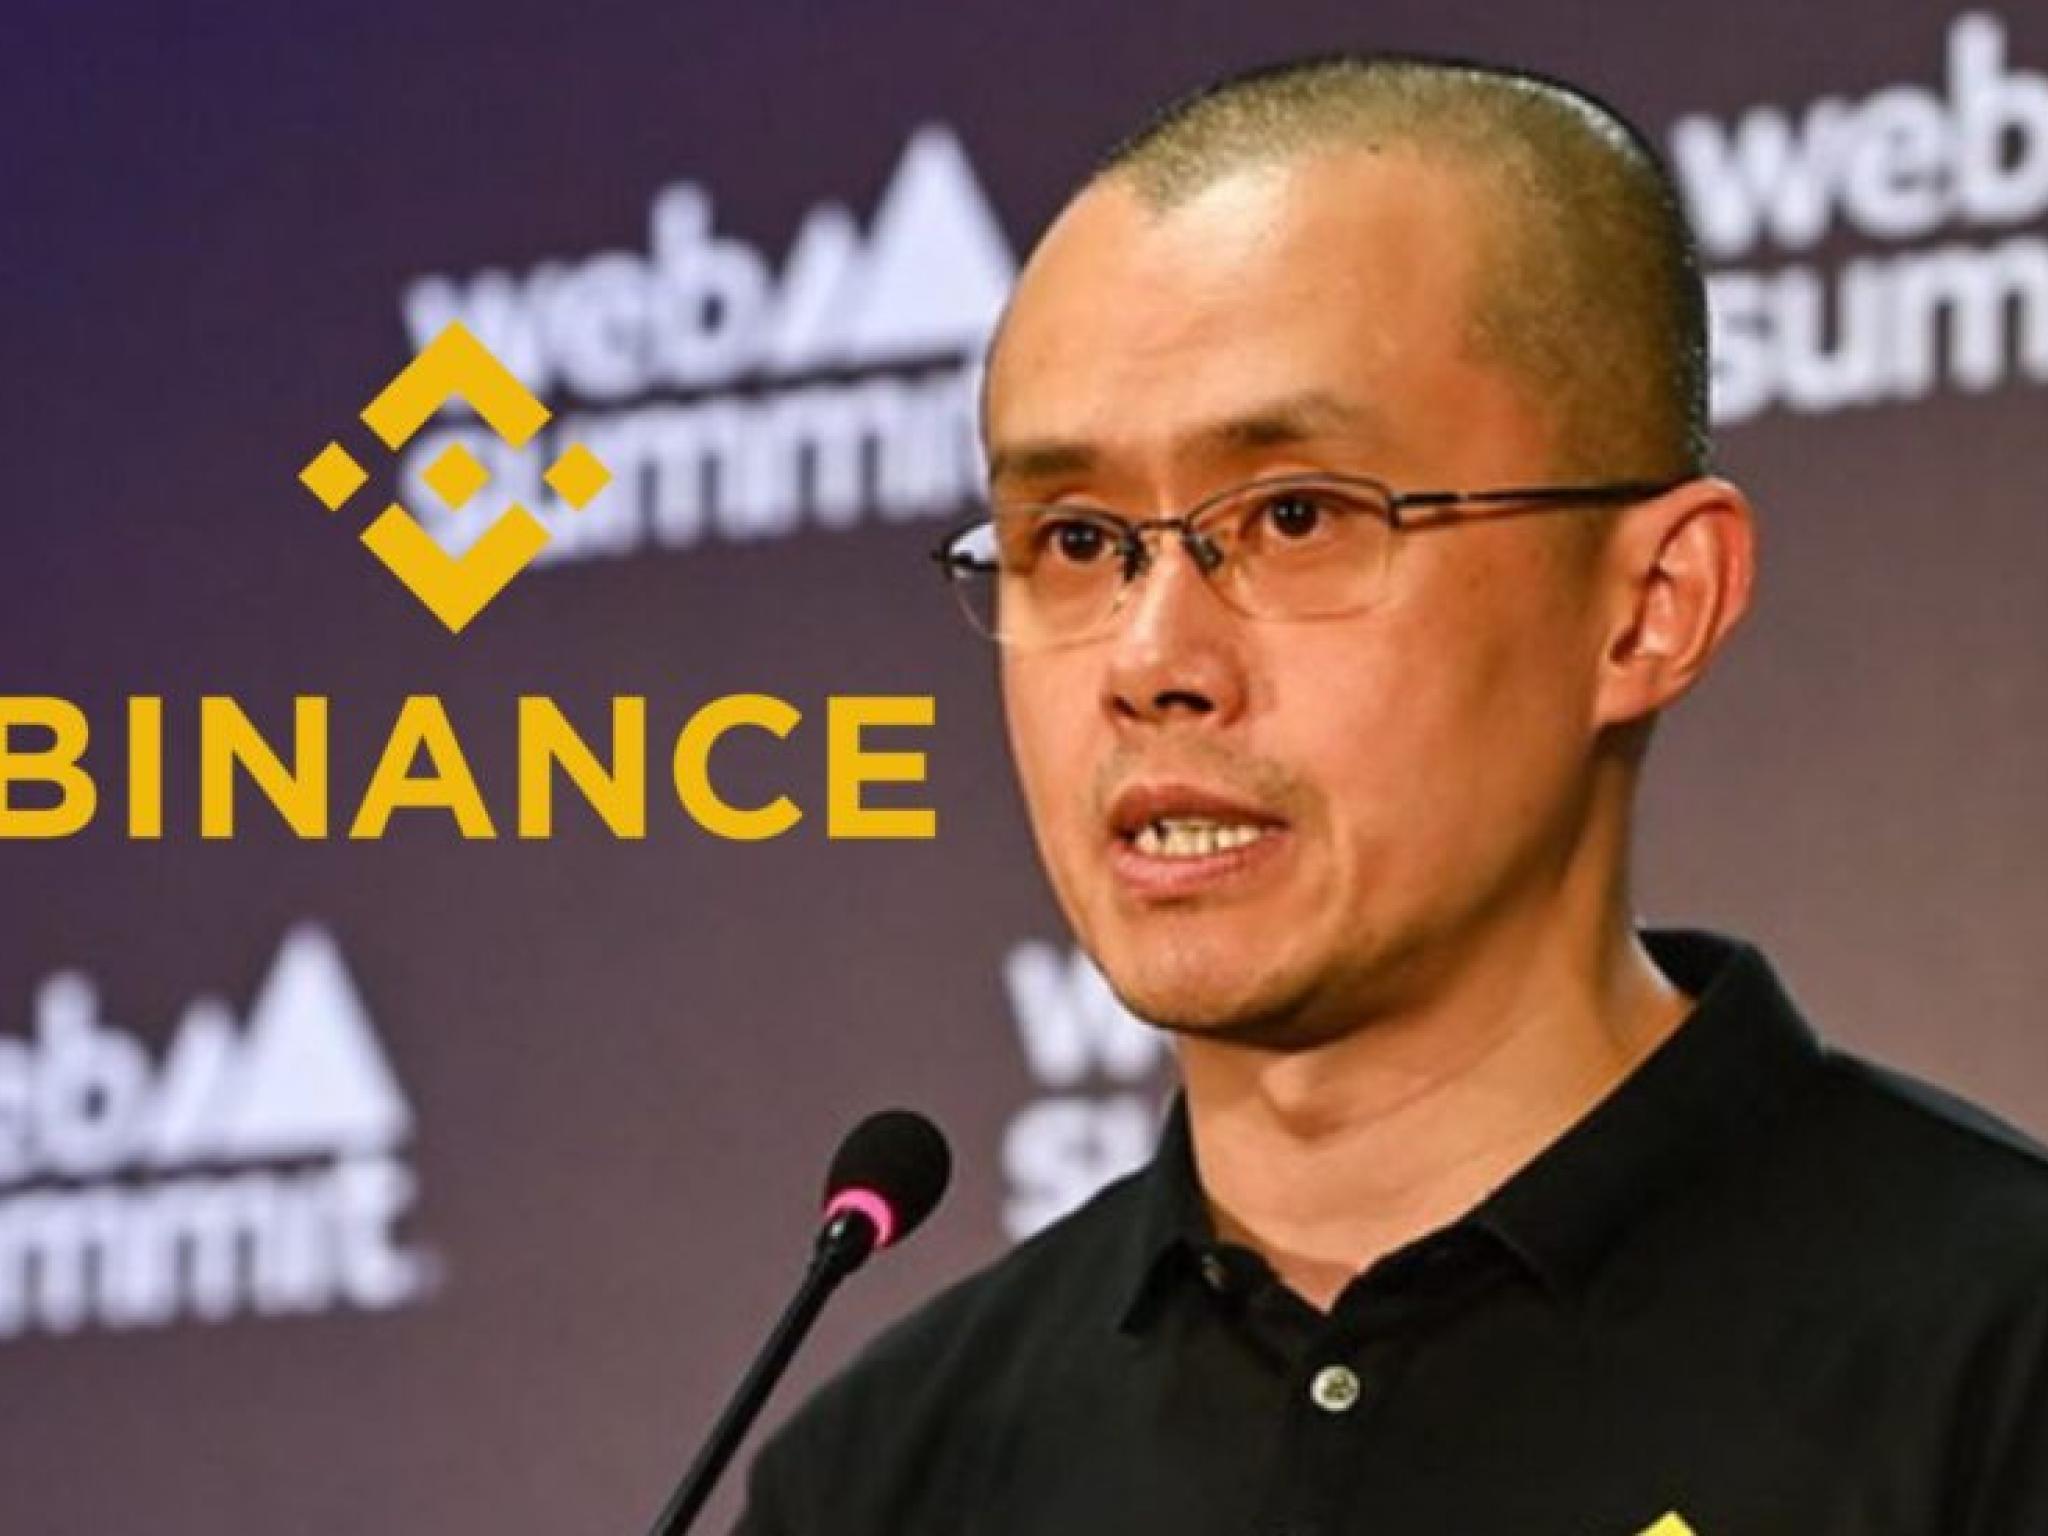 Binance Secures Major Win With Dubai Crypto License After Changpeng Zhao Surrenders Voting Power